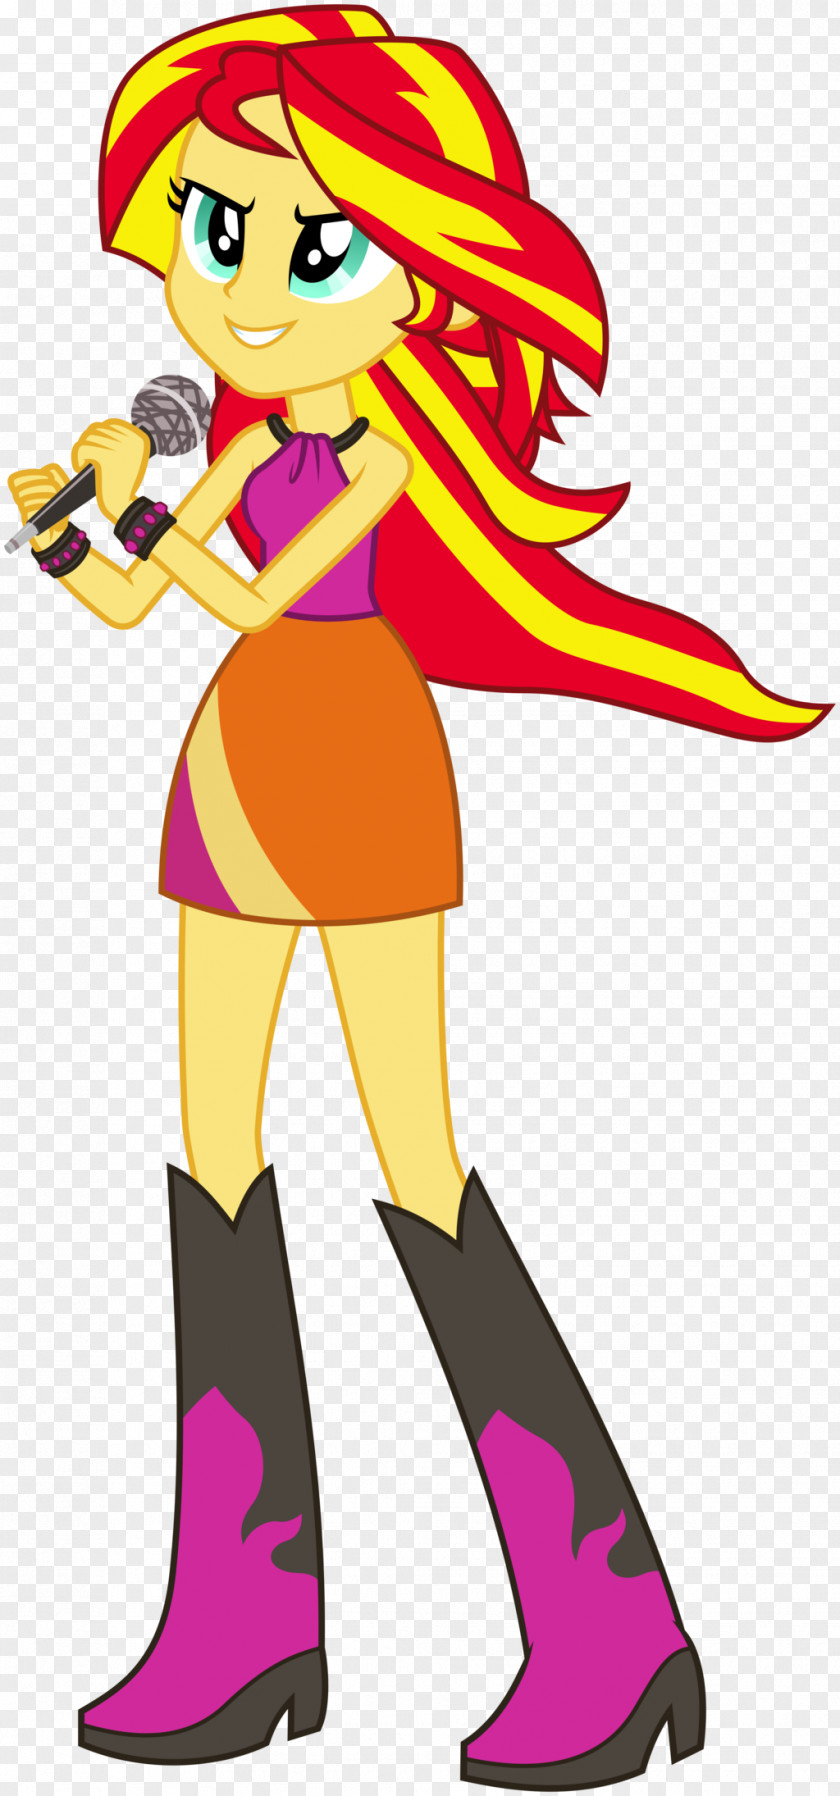 Youtube Sunset Shimmer YouTube Rainbow Dash My Little Pony: Equestria Girls PNG